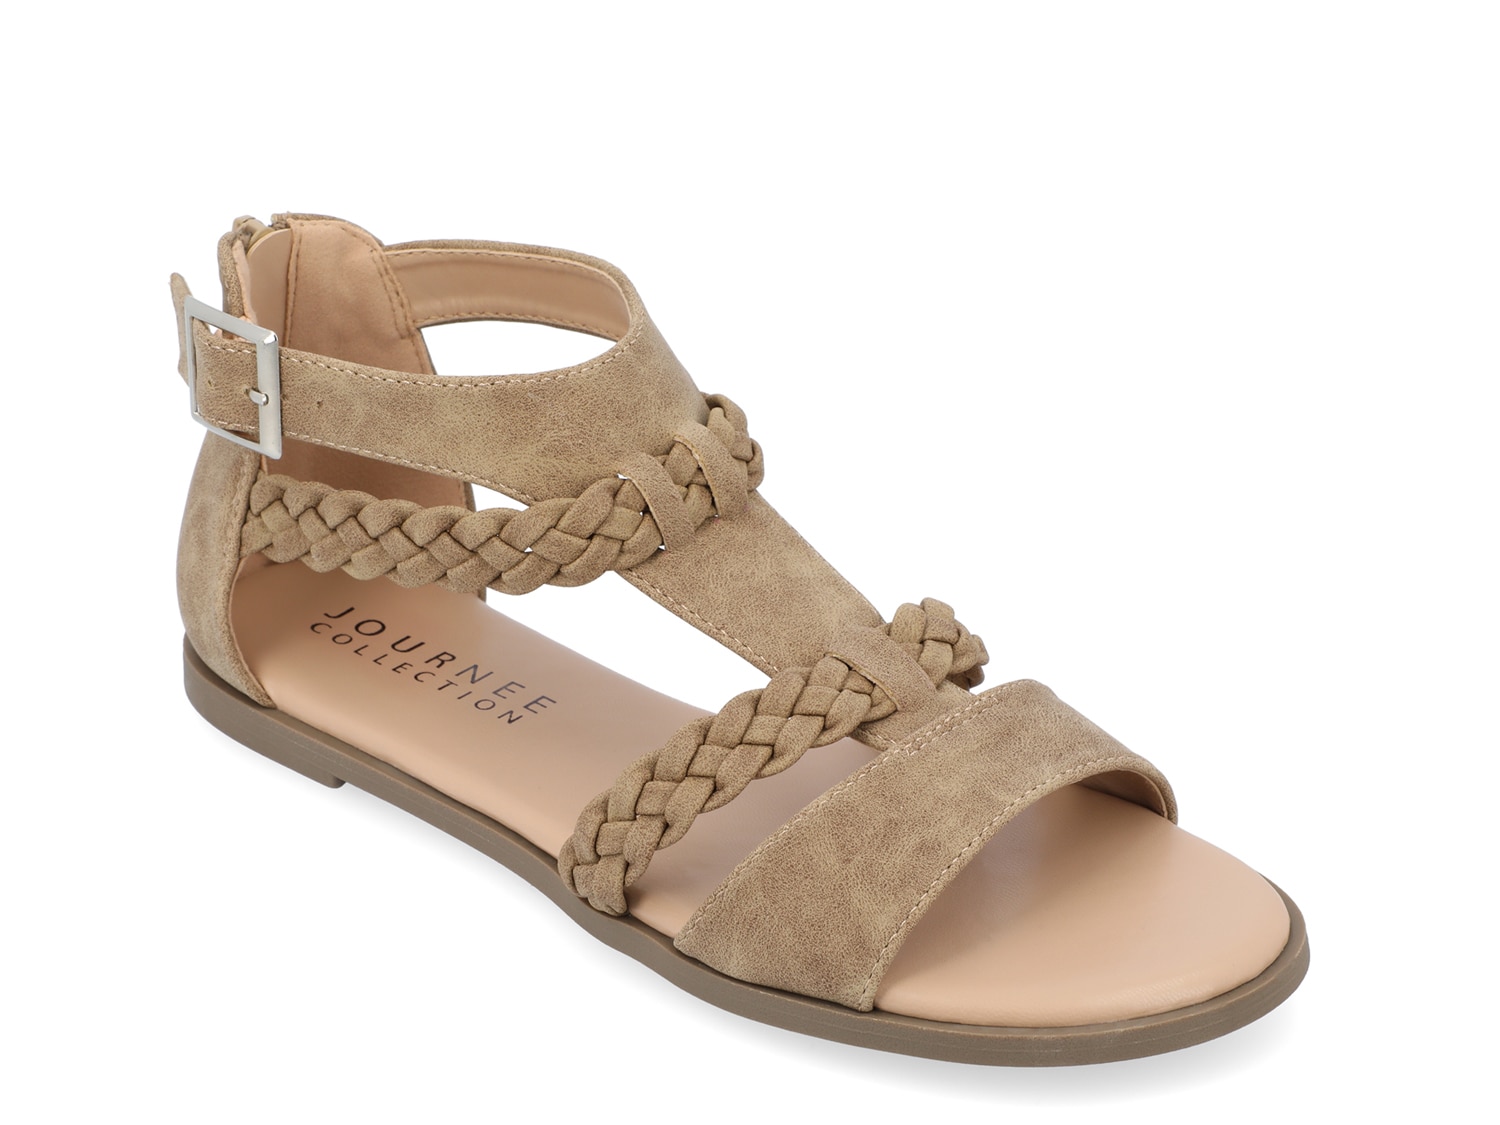 Journee Collection Florence Sandal | DSW